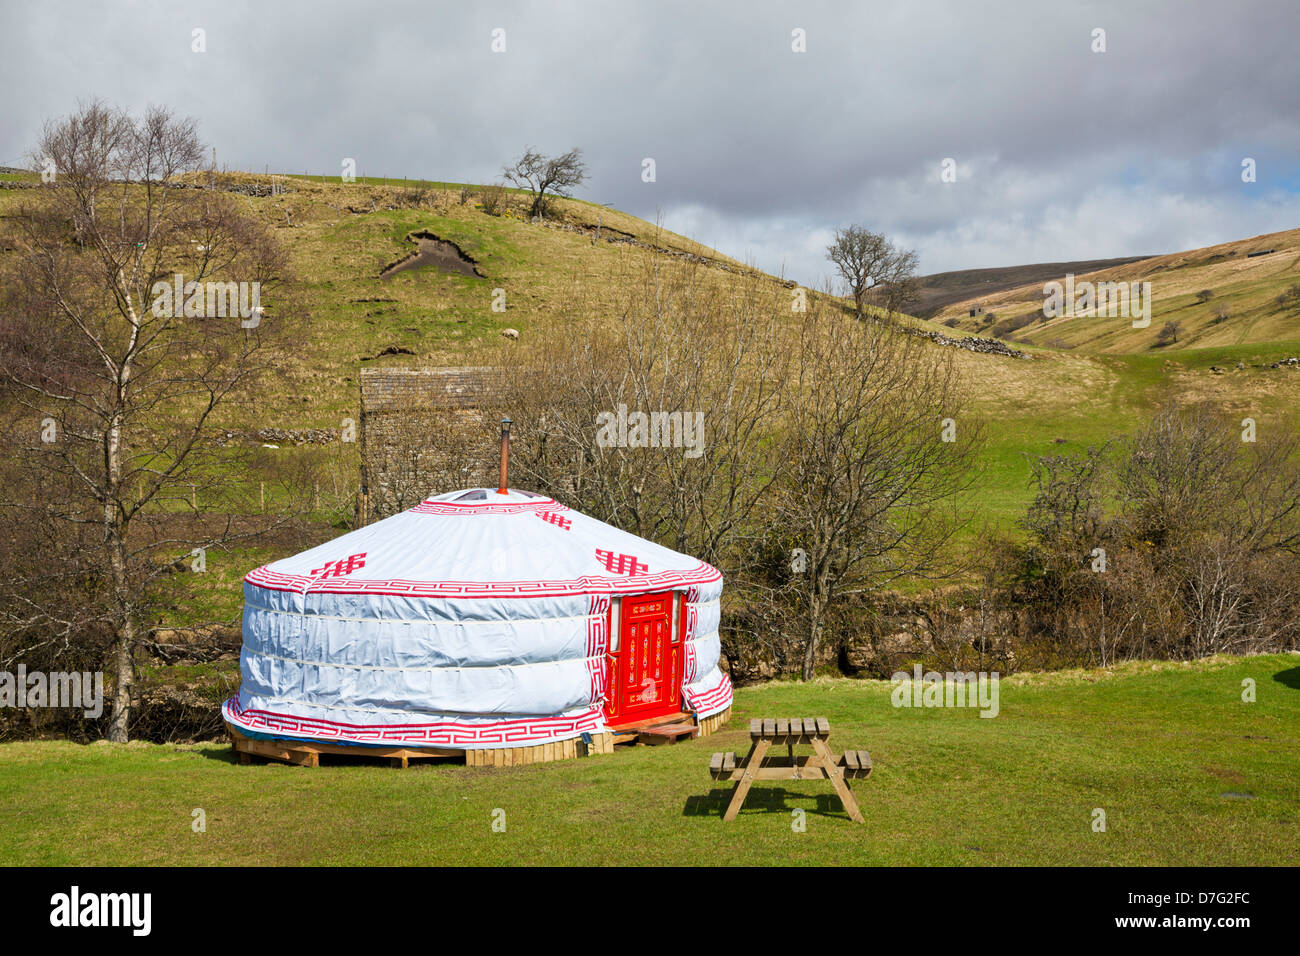 Yurt tent for camping in the village of Keld as Keld Bunk Barn and Yurts  Yorkshire Dales National Park North Yorkshire England UK GB Europe Stock Photo